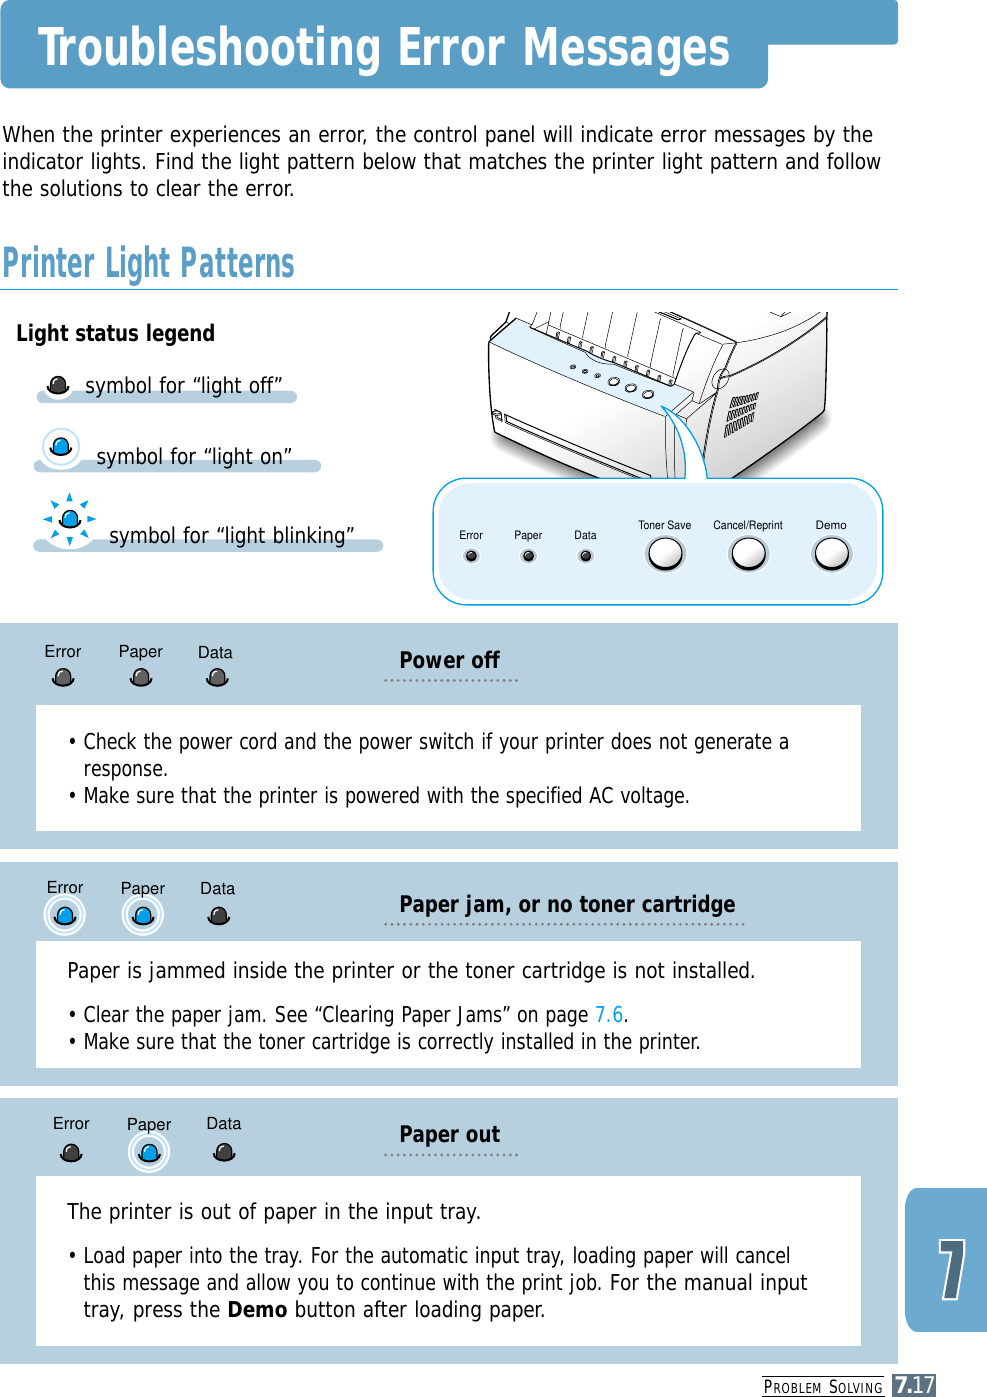 PROBLEM SOLVING7.17Toner Save Cancel/ReprintDemoDataPaperErrorWhen the printer experiences an error, the control panel will indicate error messages by theindicator lights. Find the light pattern below that matches the printer light pattern and followthe solutions to clear the error.Troubleshooting Error MessagesPrinter Light PatternsLight status legendsymbol for “light on”symbol for “light blinking”symbol for “light off”• Check the power cord and the power switch if your printer does not generate aresponse.• Make sure that the printer is powered with the specified AC voltage.Power offError Paper DataThe printer is out of paper in the input tray. • Load paper into the tray. For the automatic input tray, loading paper will cancelthis message and allow you to continue with the print job. For the manual inputtray, press the Demo button after loading paper.Paper out DataError PaperPaper is jammed inside the printer or the toner cartridge is not installed. • Clear the paper jam. See “Clearing Paper Jams” on page 7.6.• Make sure that the toner cartridge is correctly installed in the printer.Paper jam, or no toner cartridgeDataError Paper